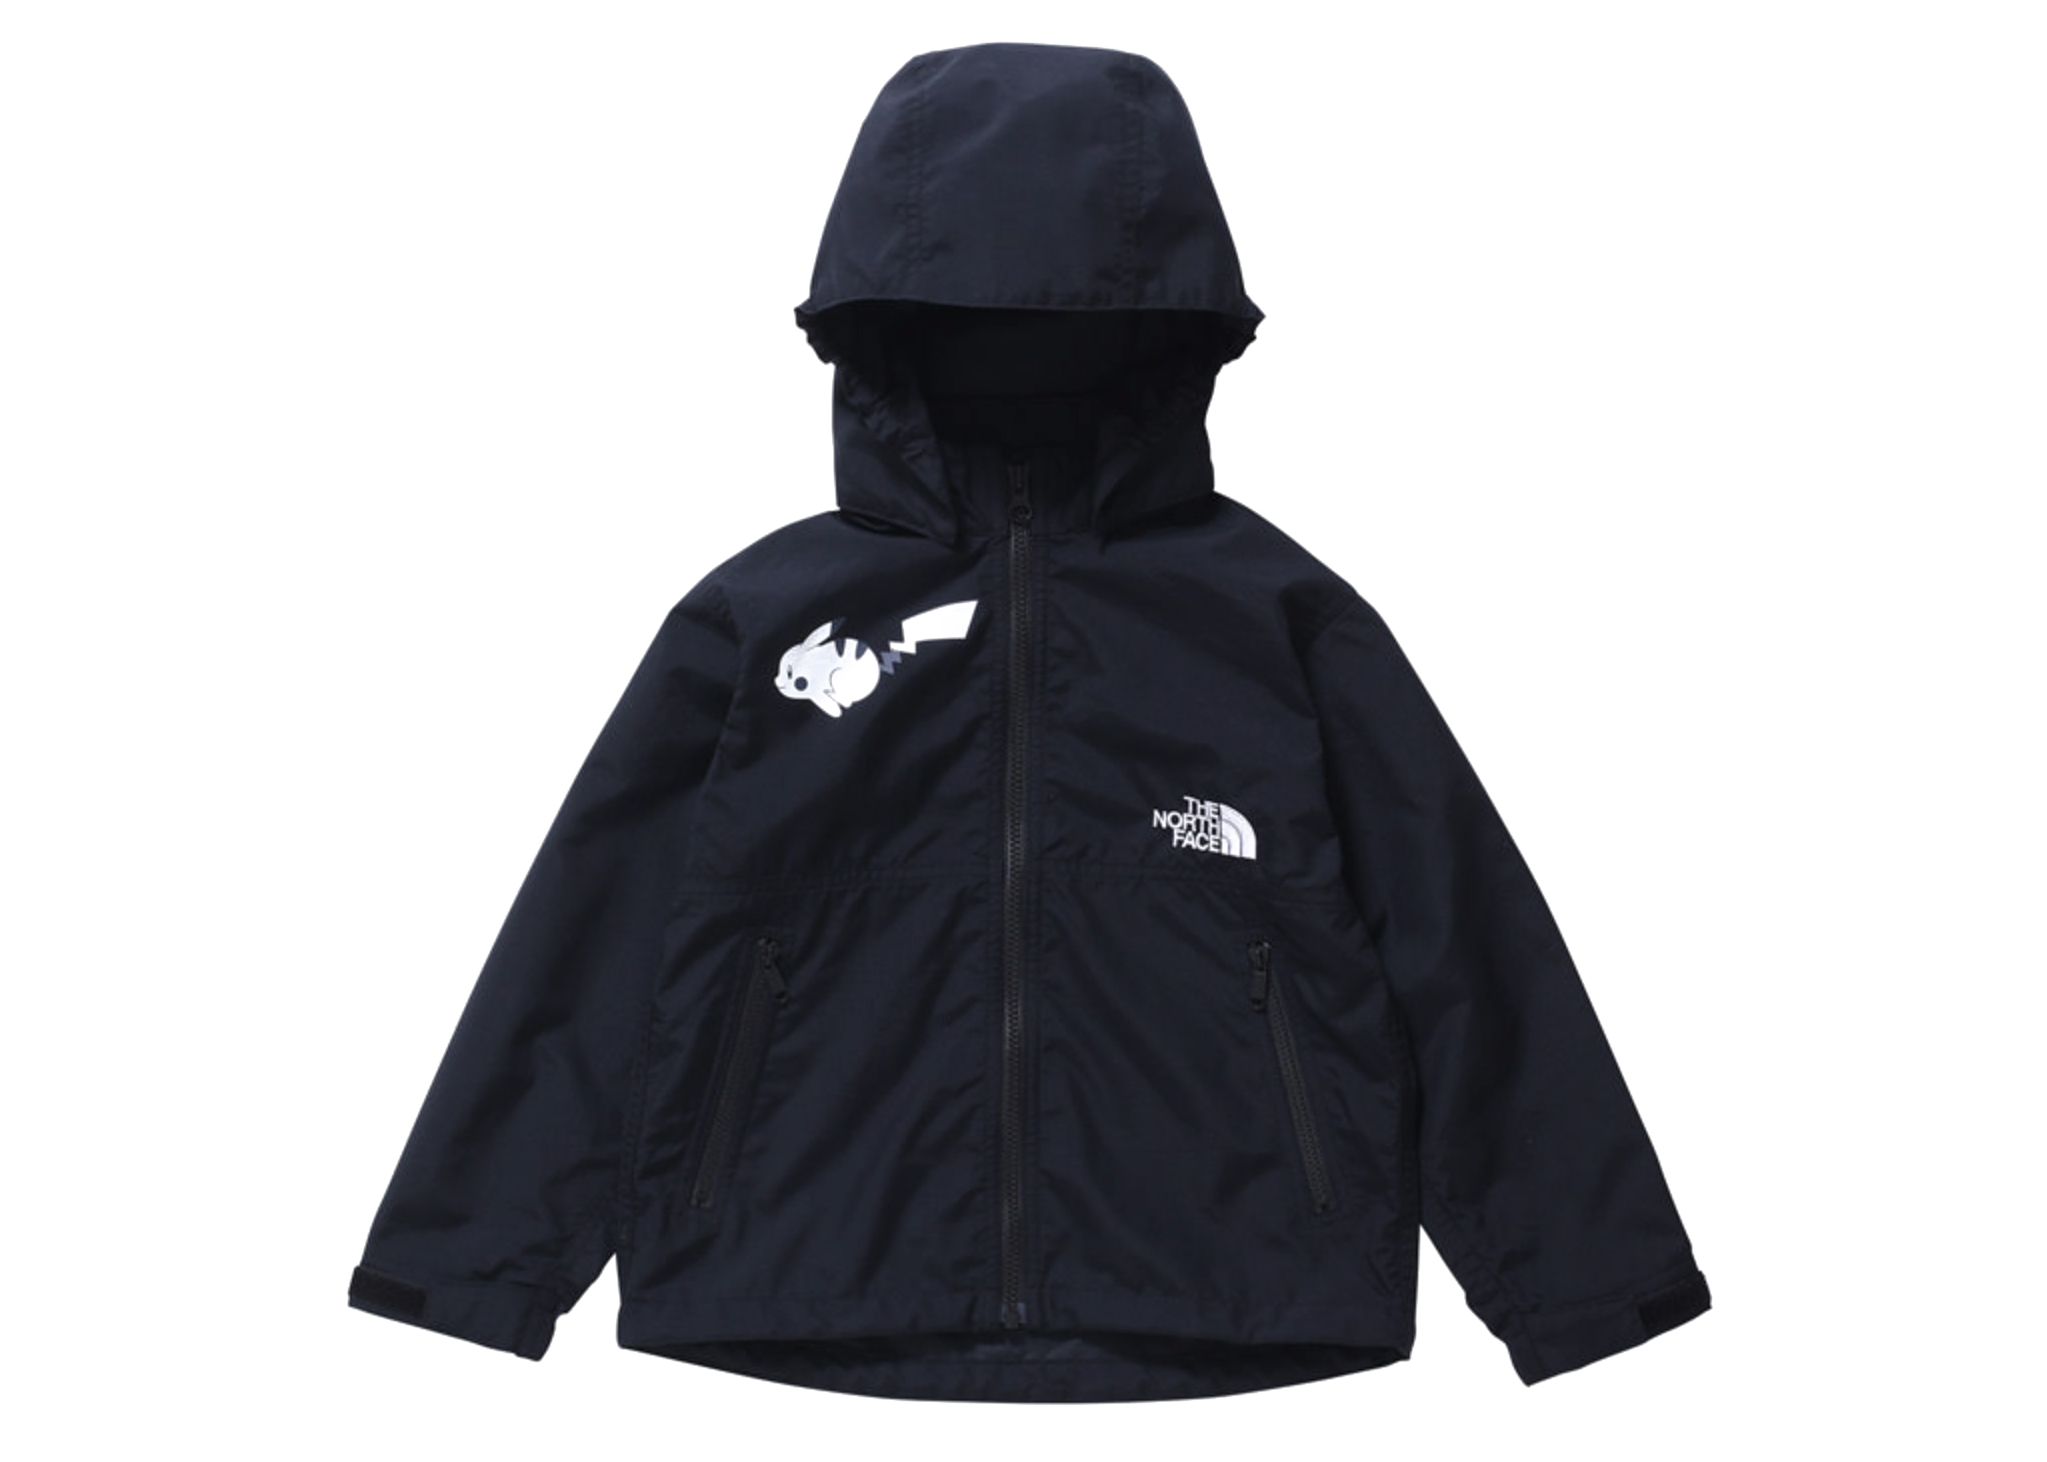 The North Face x Pokemon Young Explorers Kids Jacket Black Kids